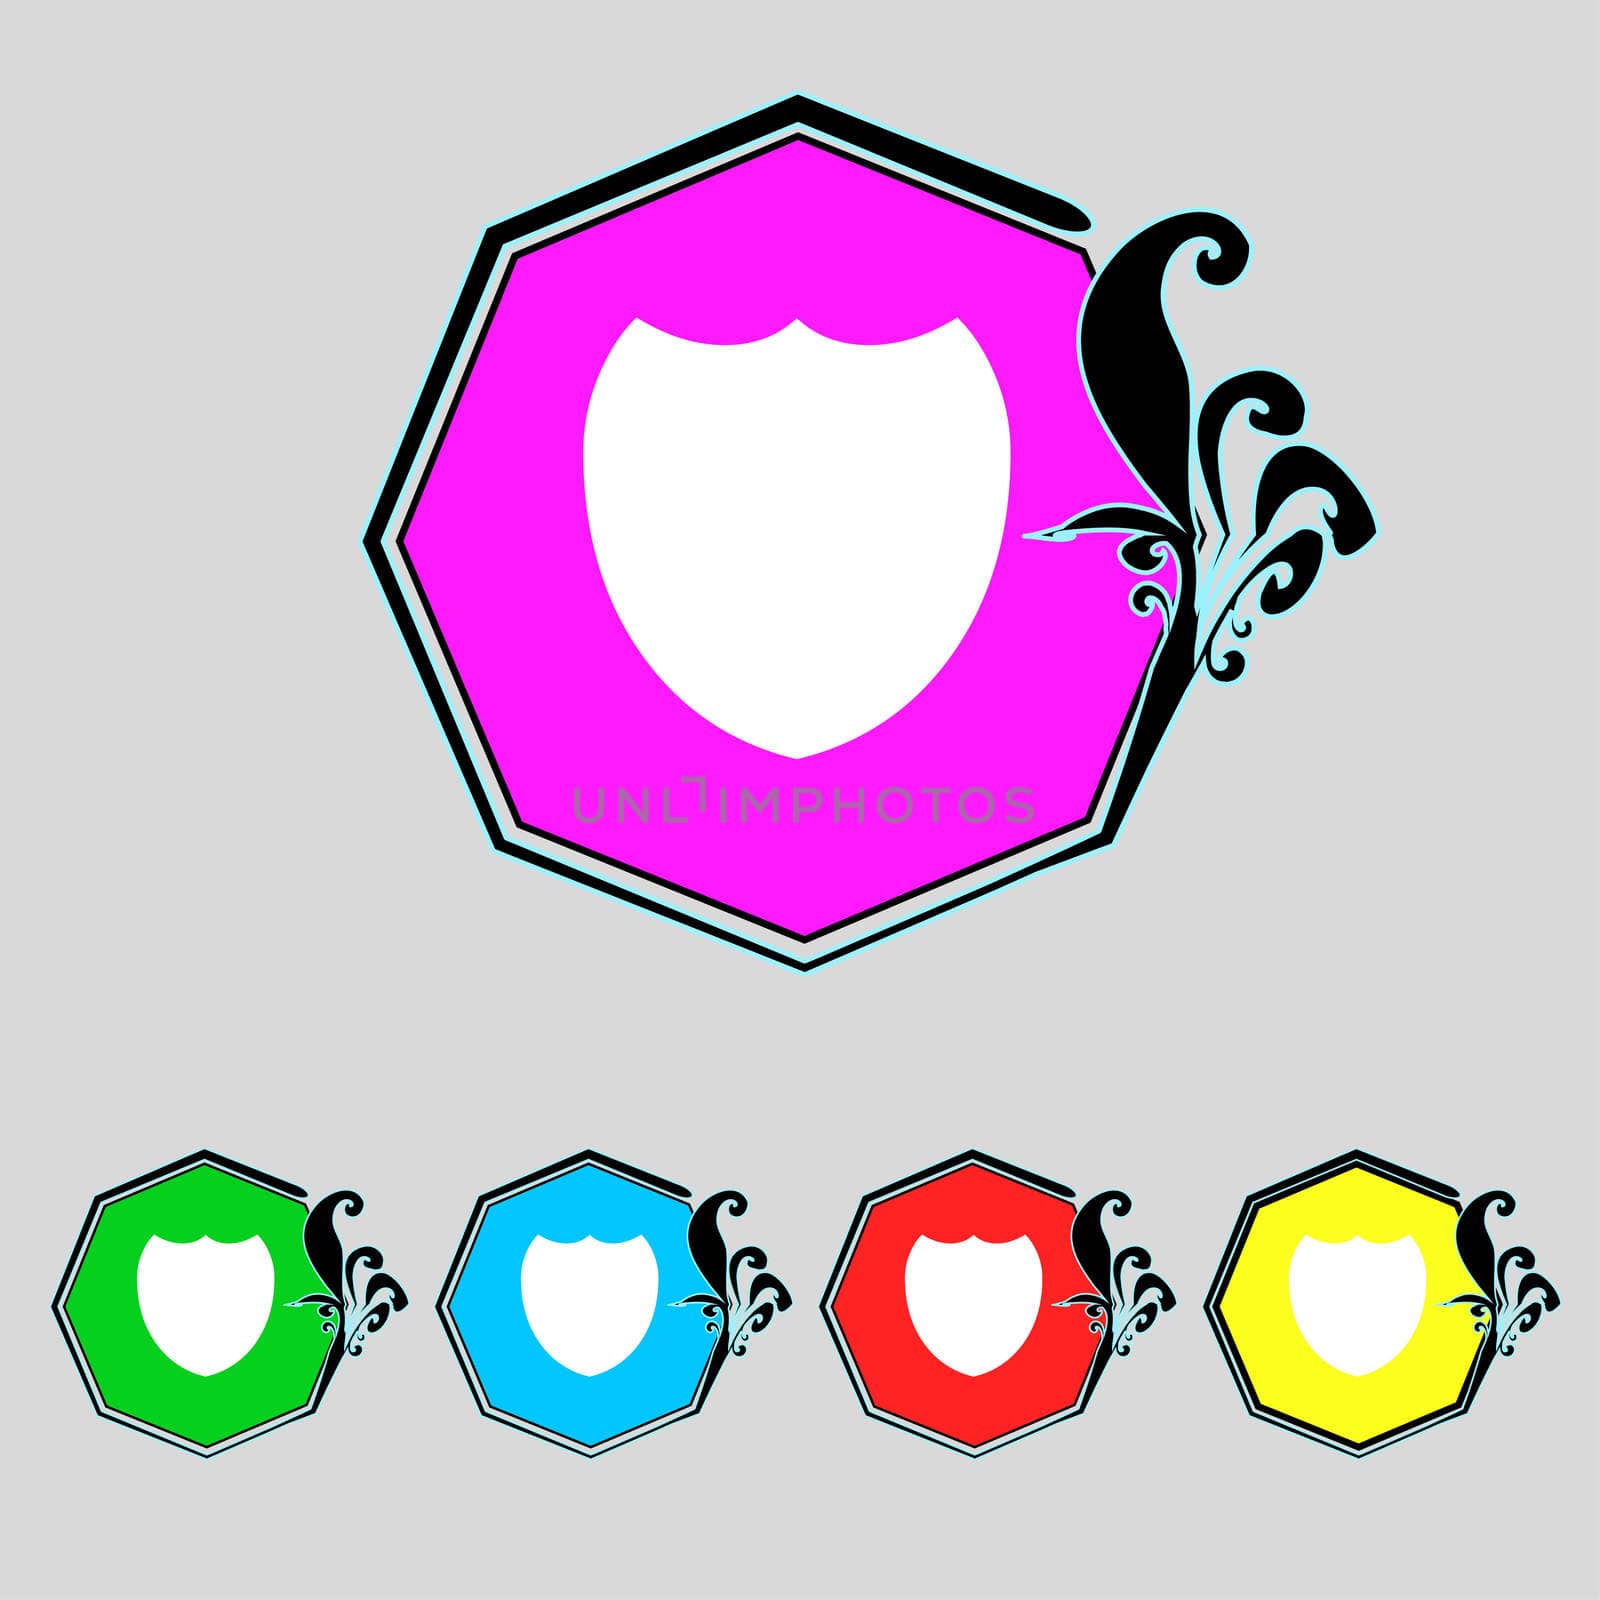 Shield sign icon. Protection symbol. Set colour buttons. illustration